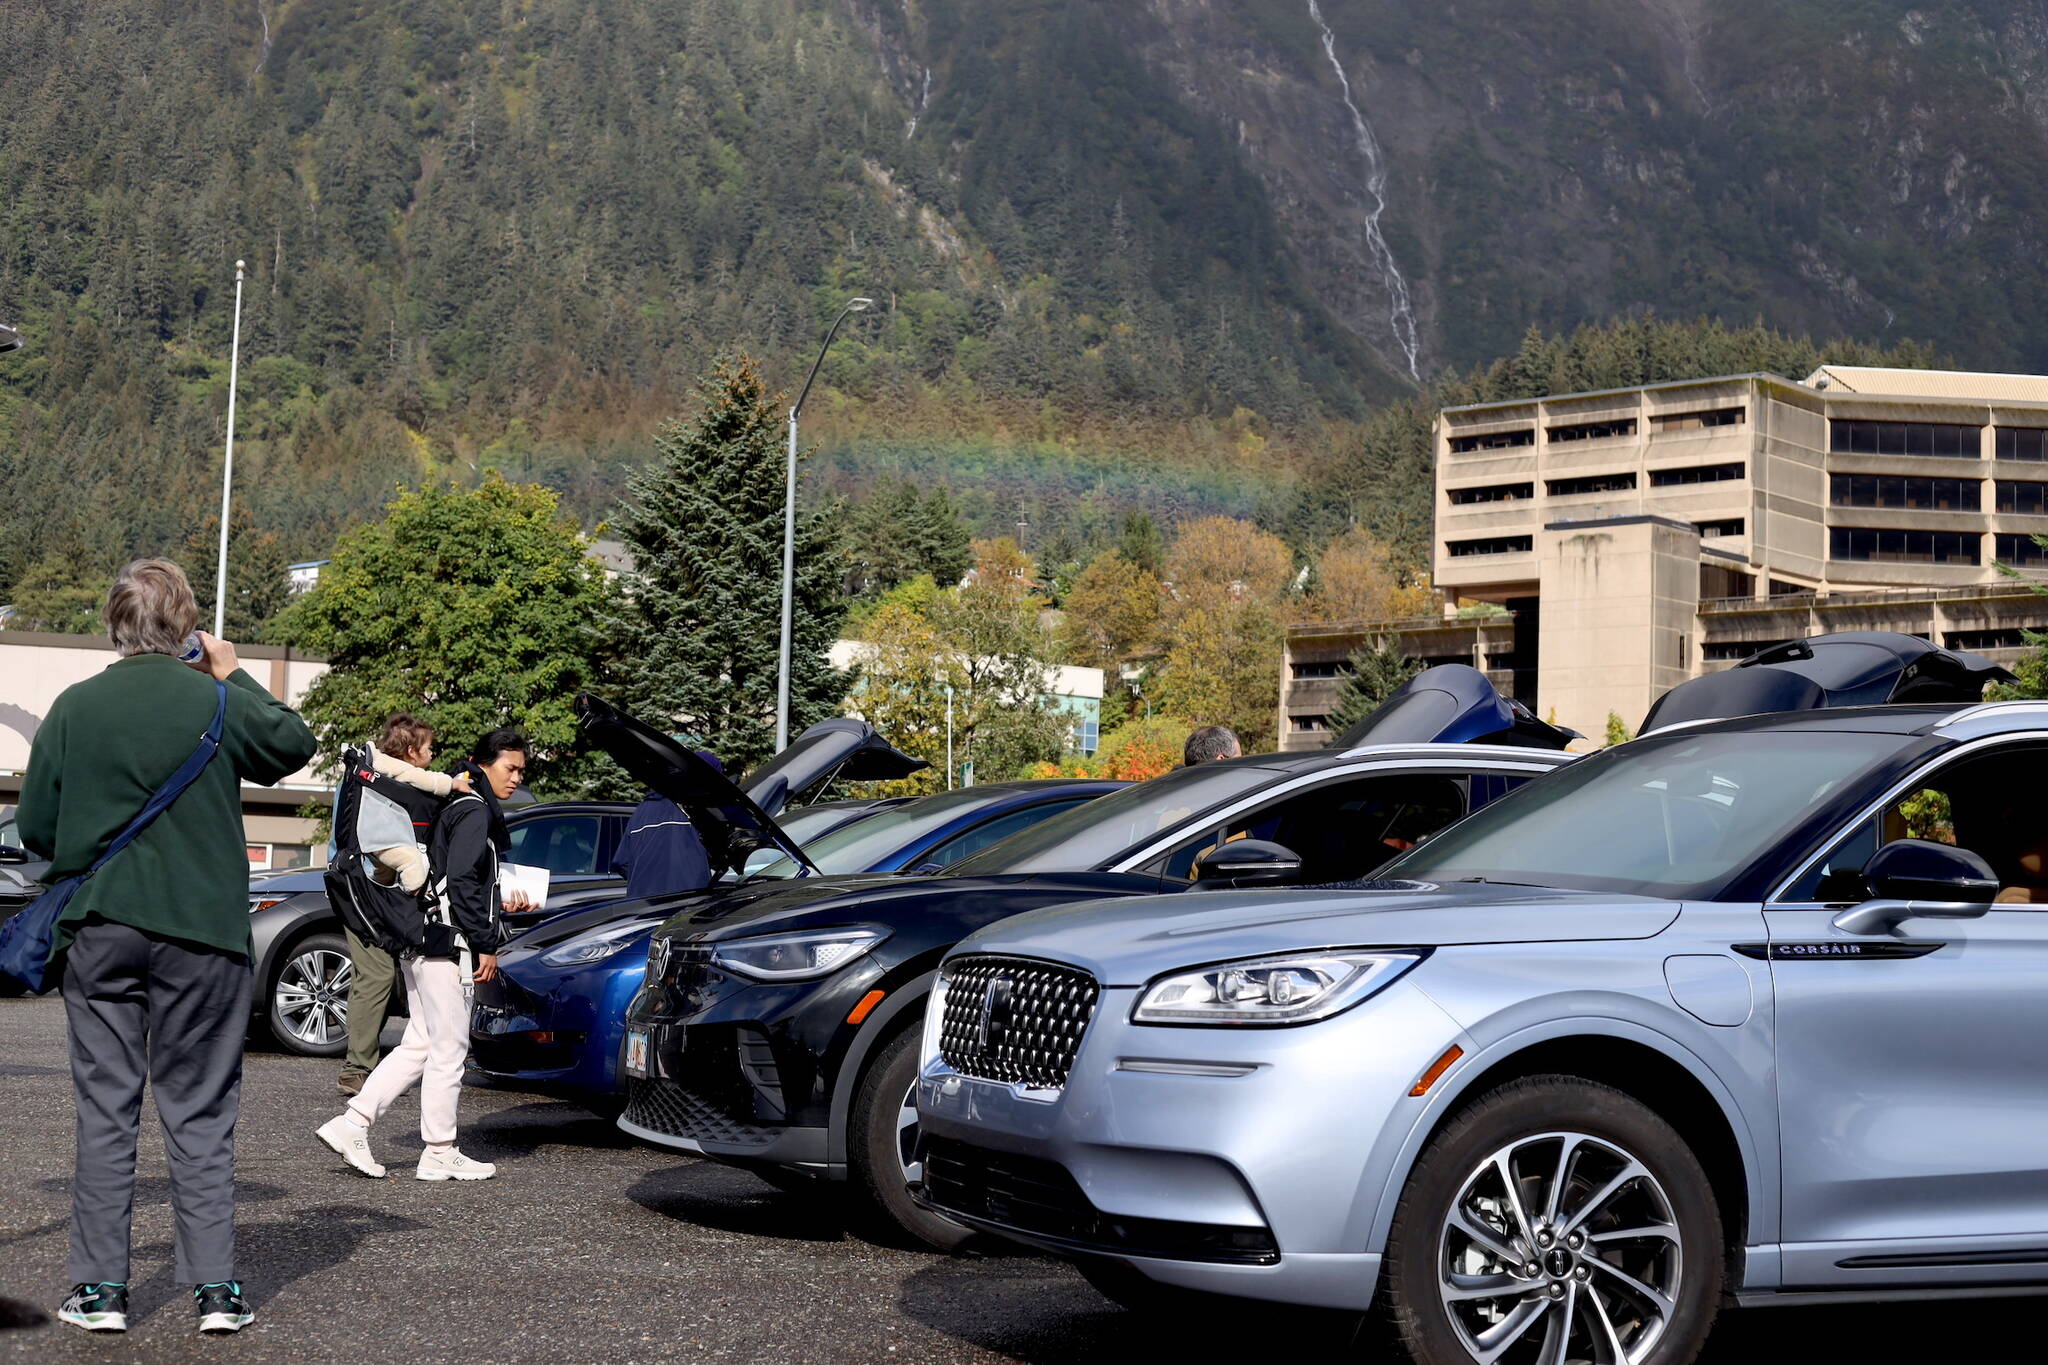 A rainbow appears over downtown as residents check out rows of electric vehicles at Juneau’s EV E-bike Roundup Saturday afternoon. (Clarise Larson / Juneau Empire)